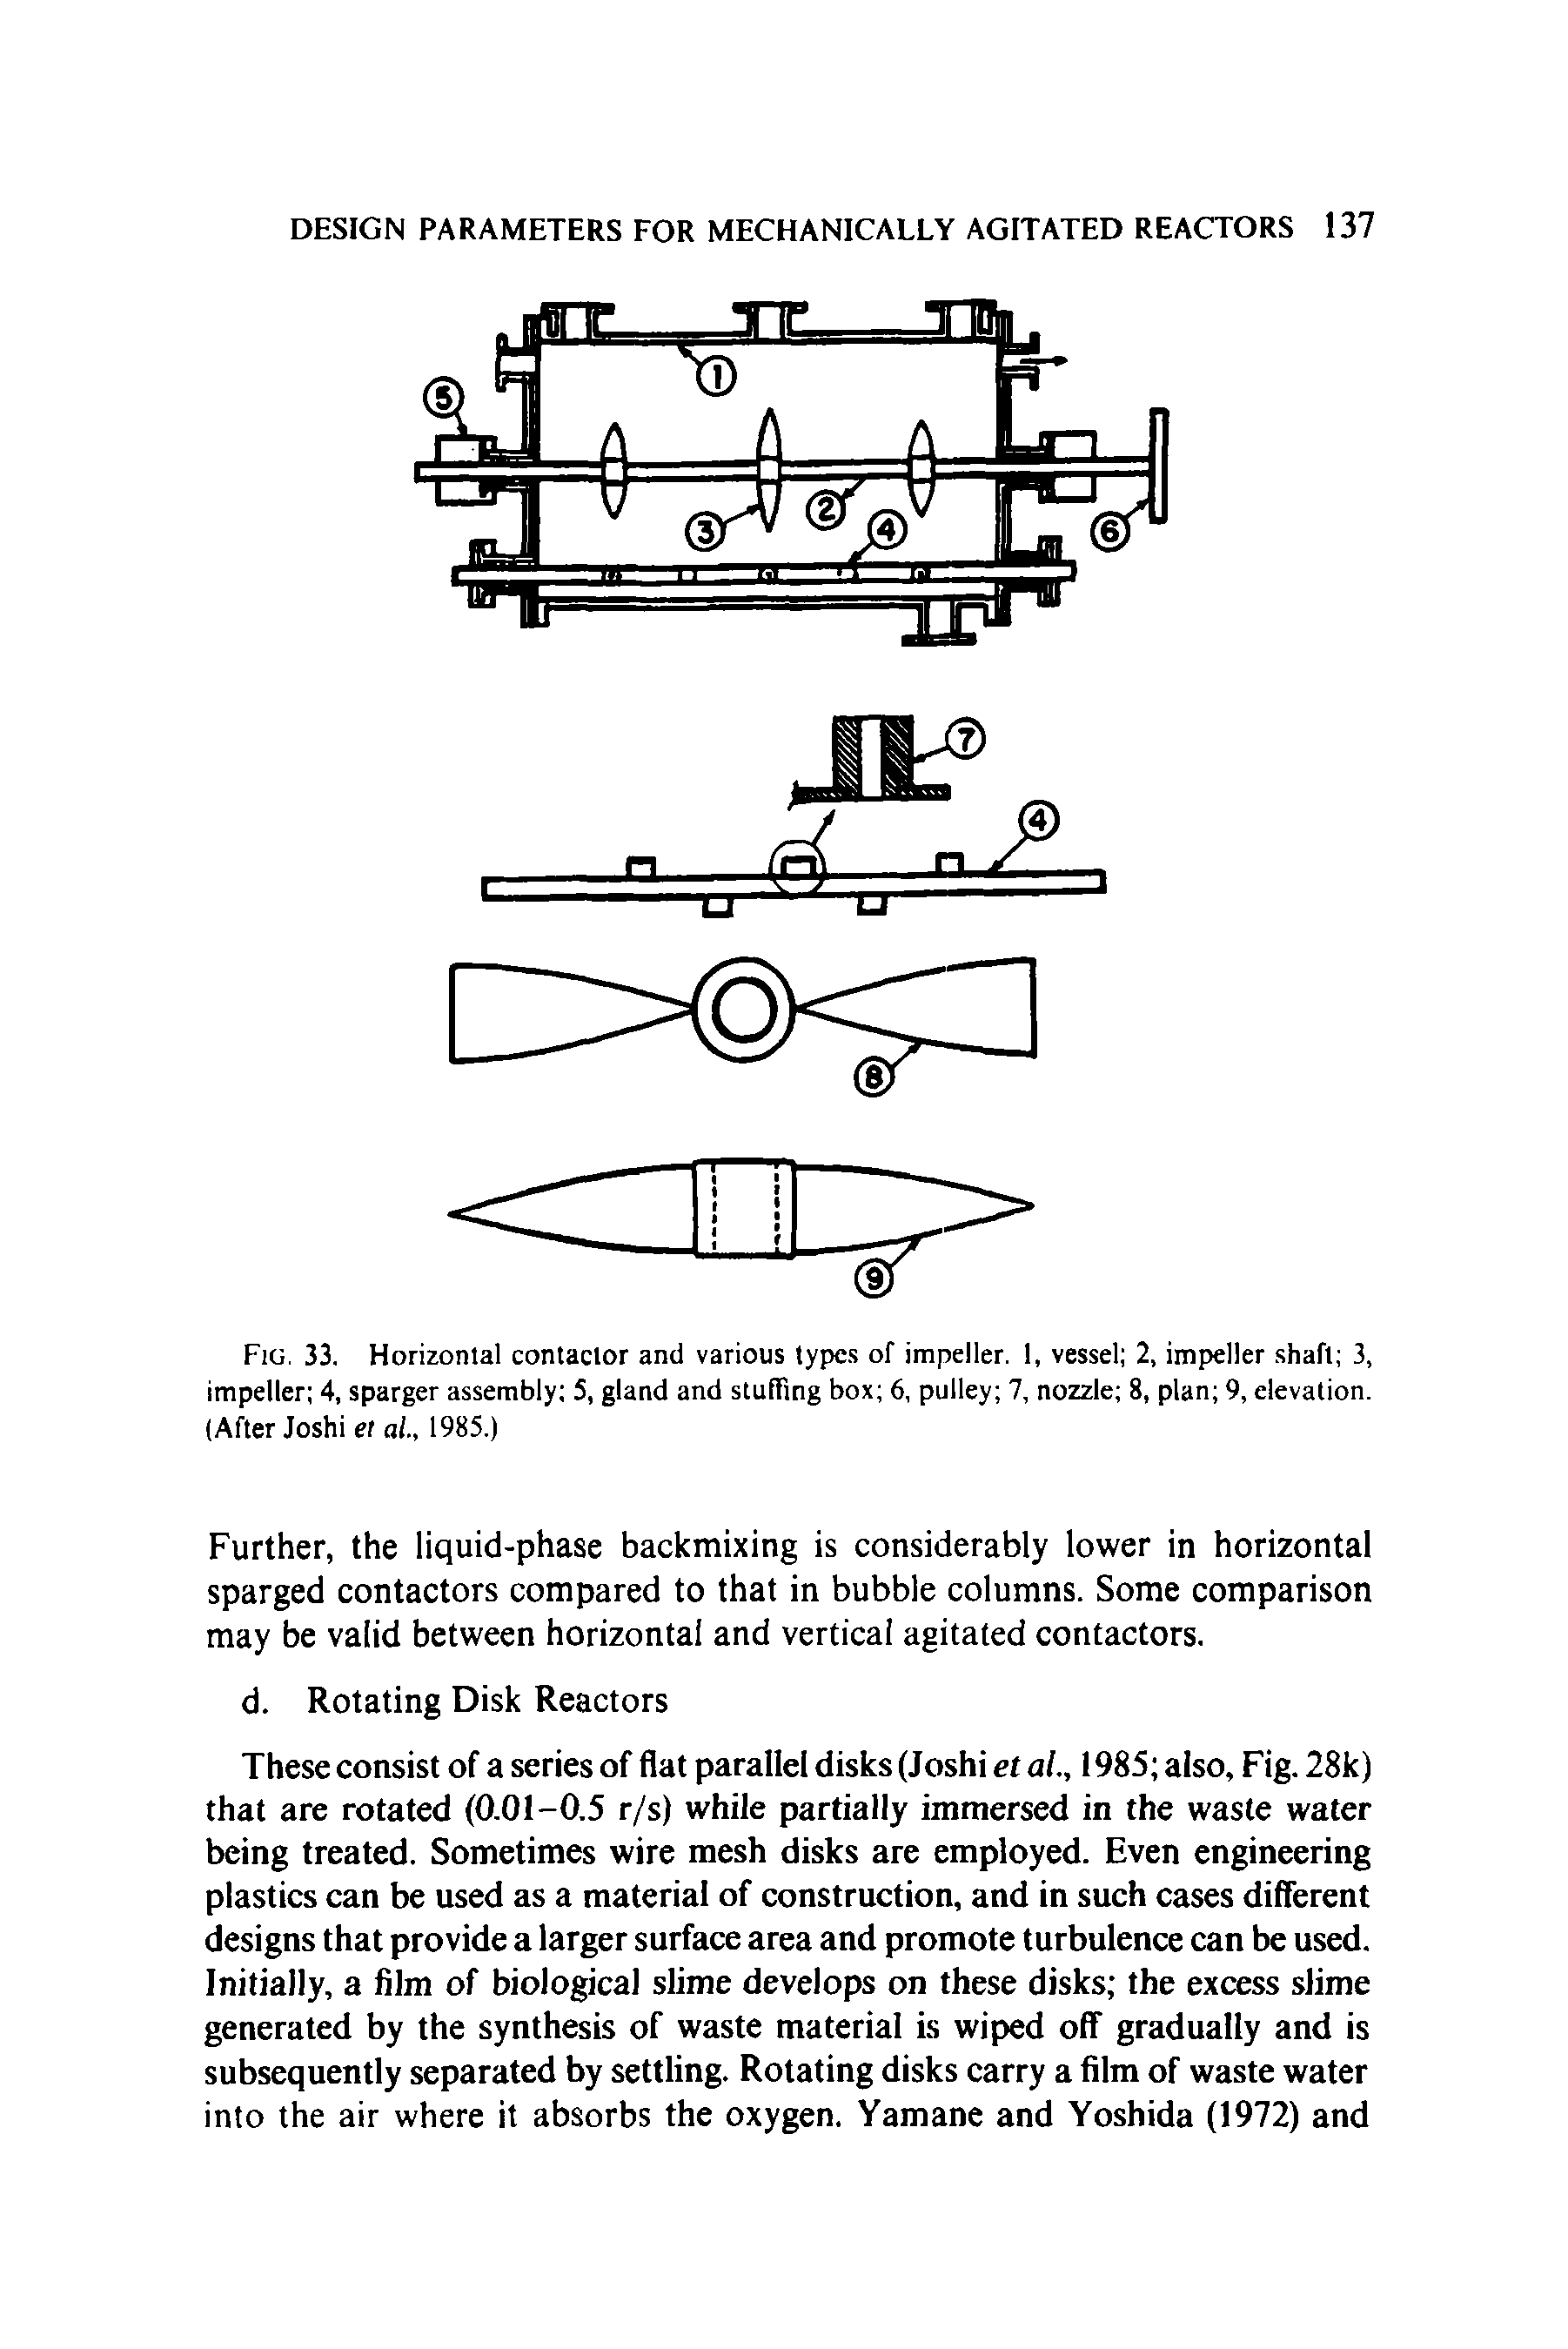 Fig. 33. Horizontal contactor and various types of impeller. 1, vessel 2, impeller shaft 3, impeller 4, sparger assembly 5, gland and stuffing box 6, pulley 7, nozzle 8, plan 9, elevation. (After Joshi el al., 1985.)...